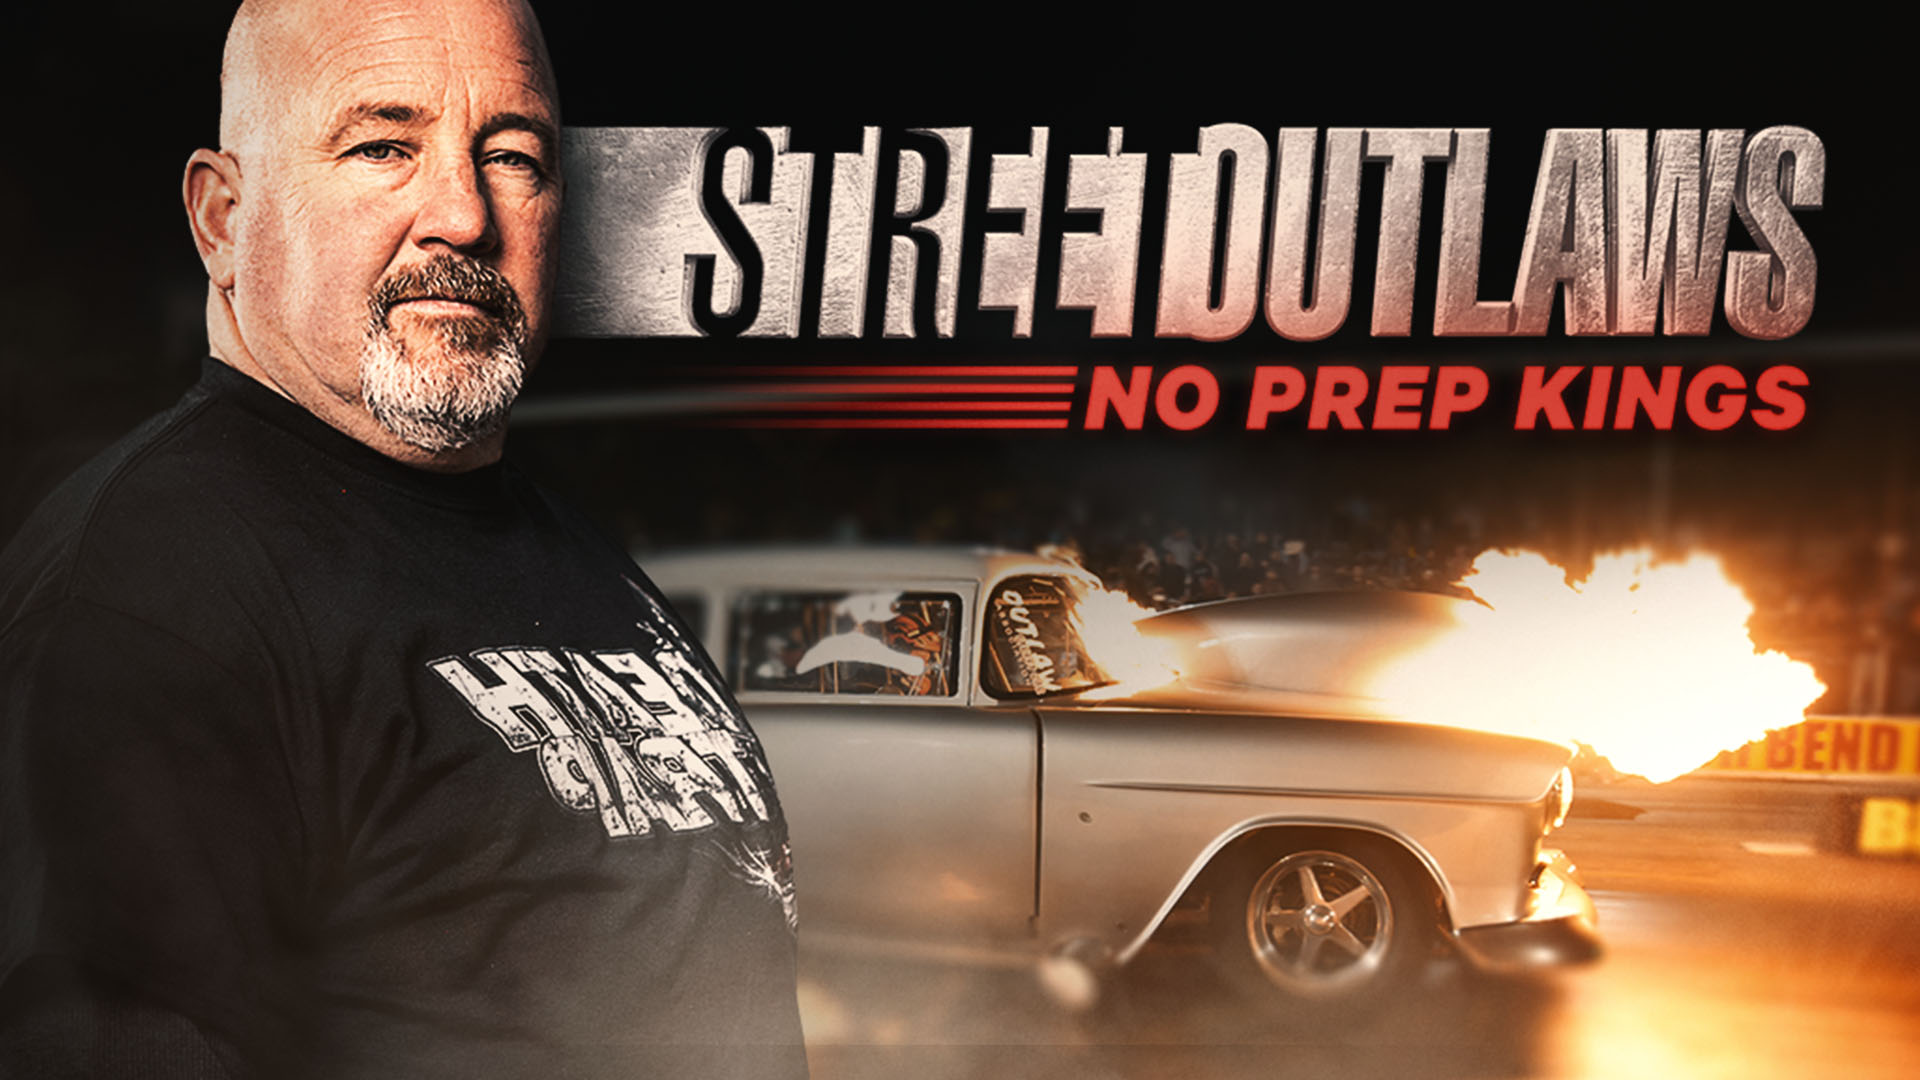 Watch Street Outlaws: No Prep Kings live or on-demand | Freeview Australia